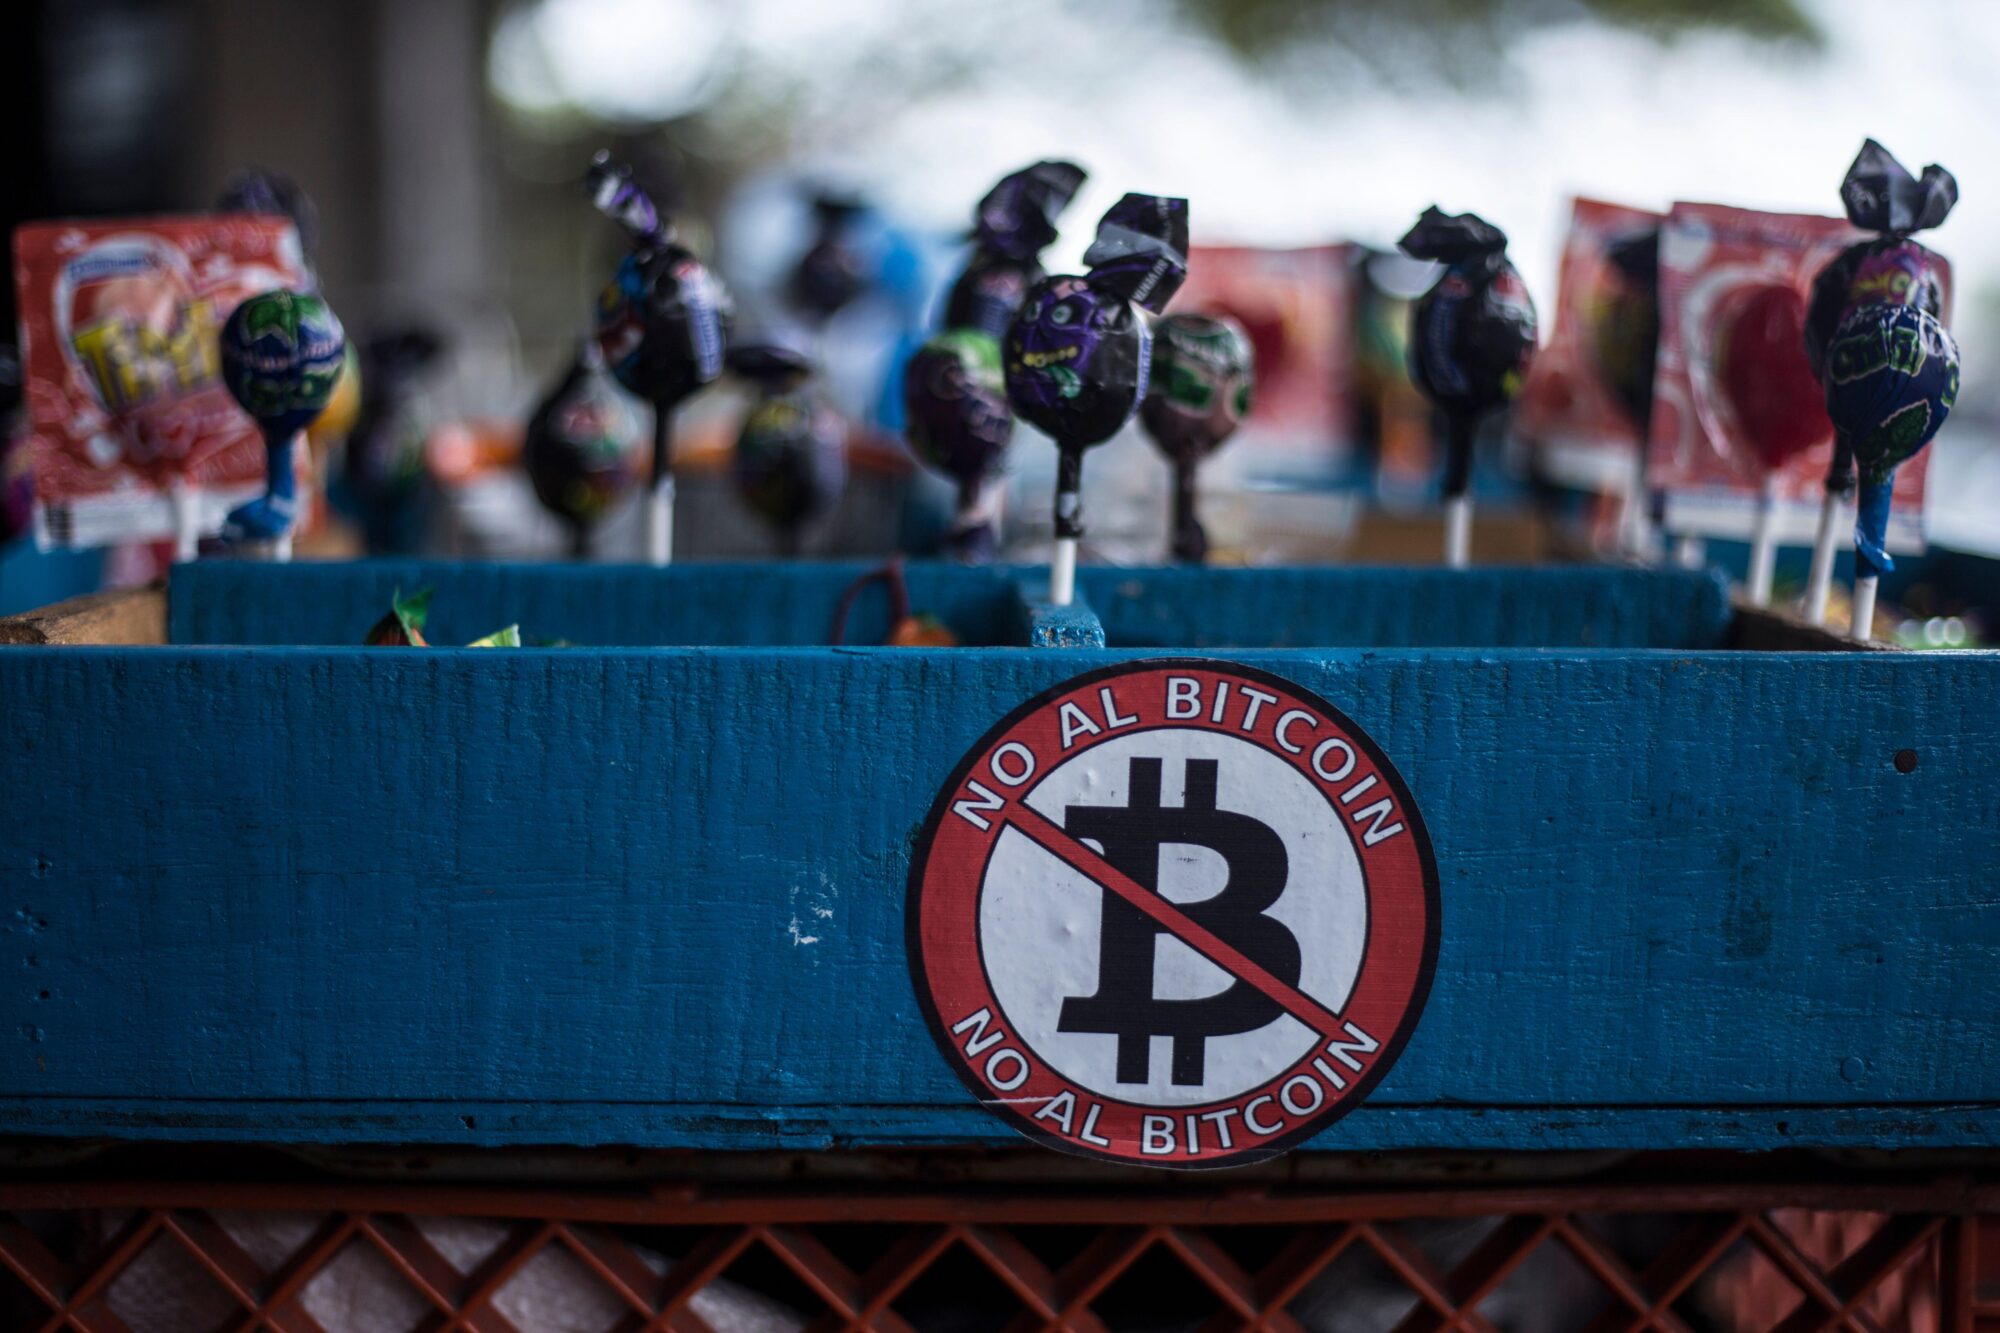 Candy box with a letter saying "no to Bitcoin".